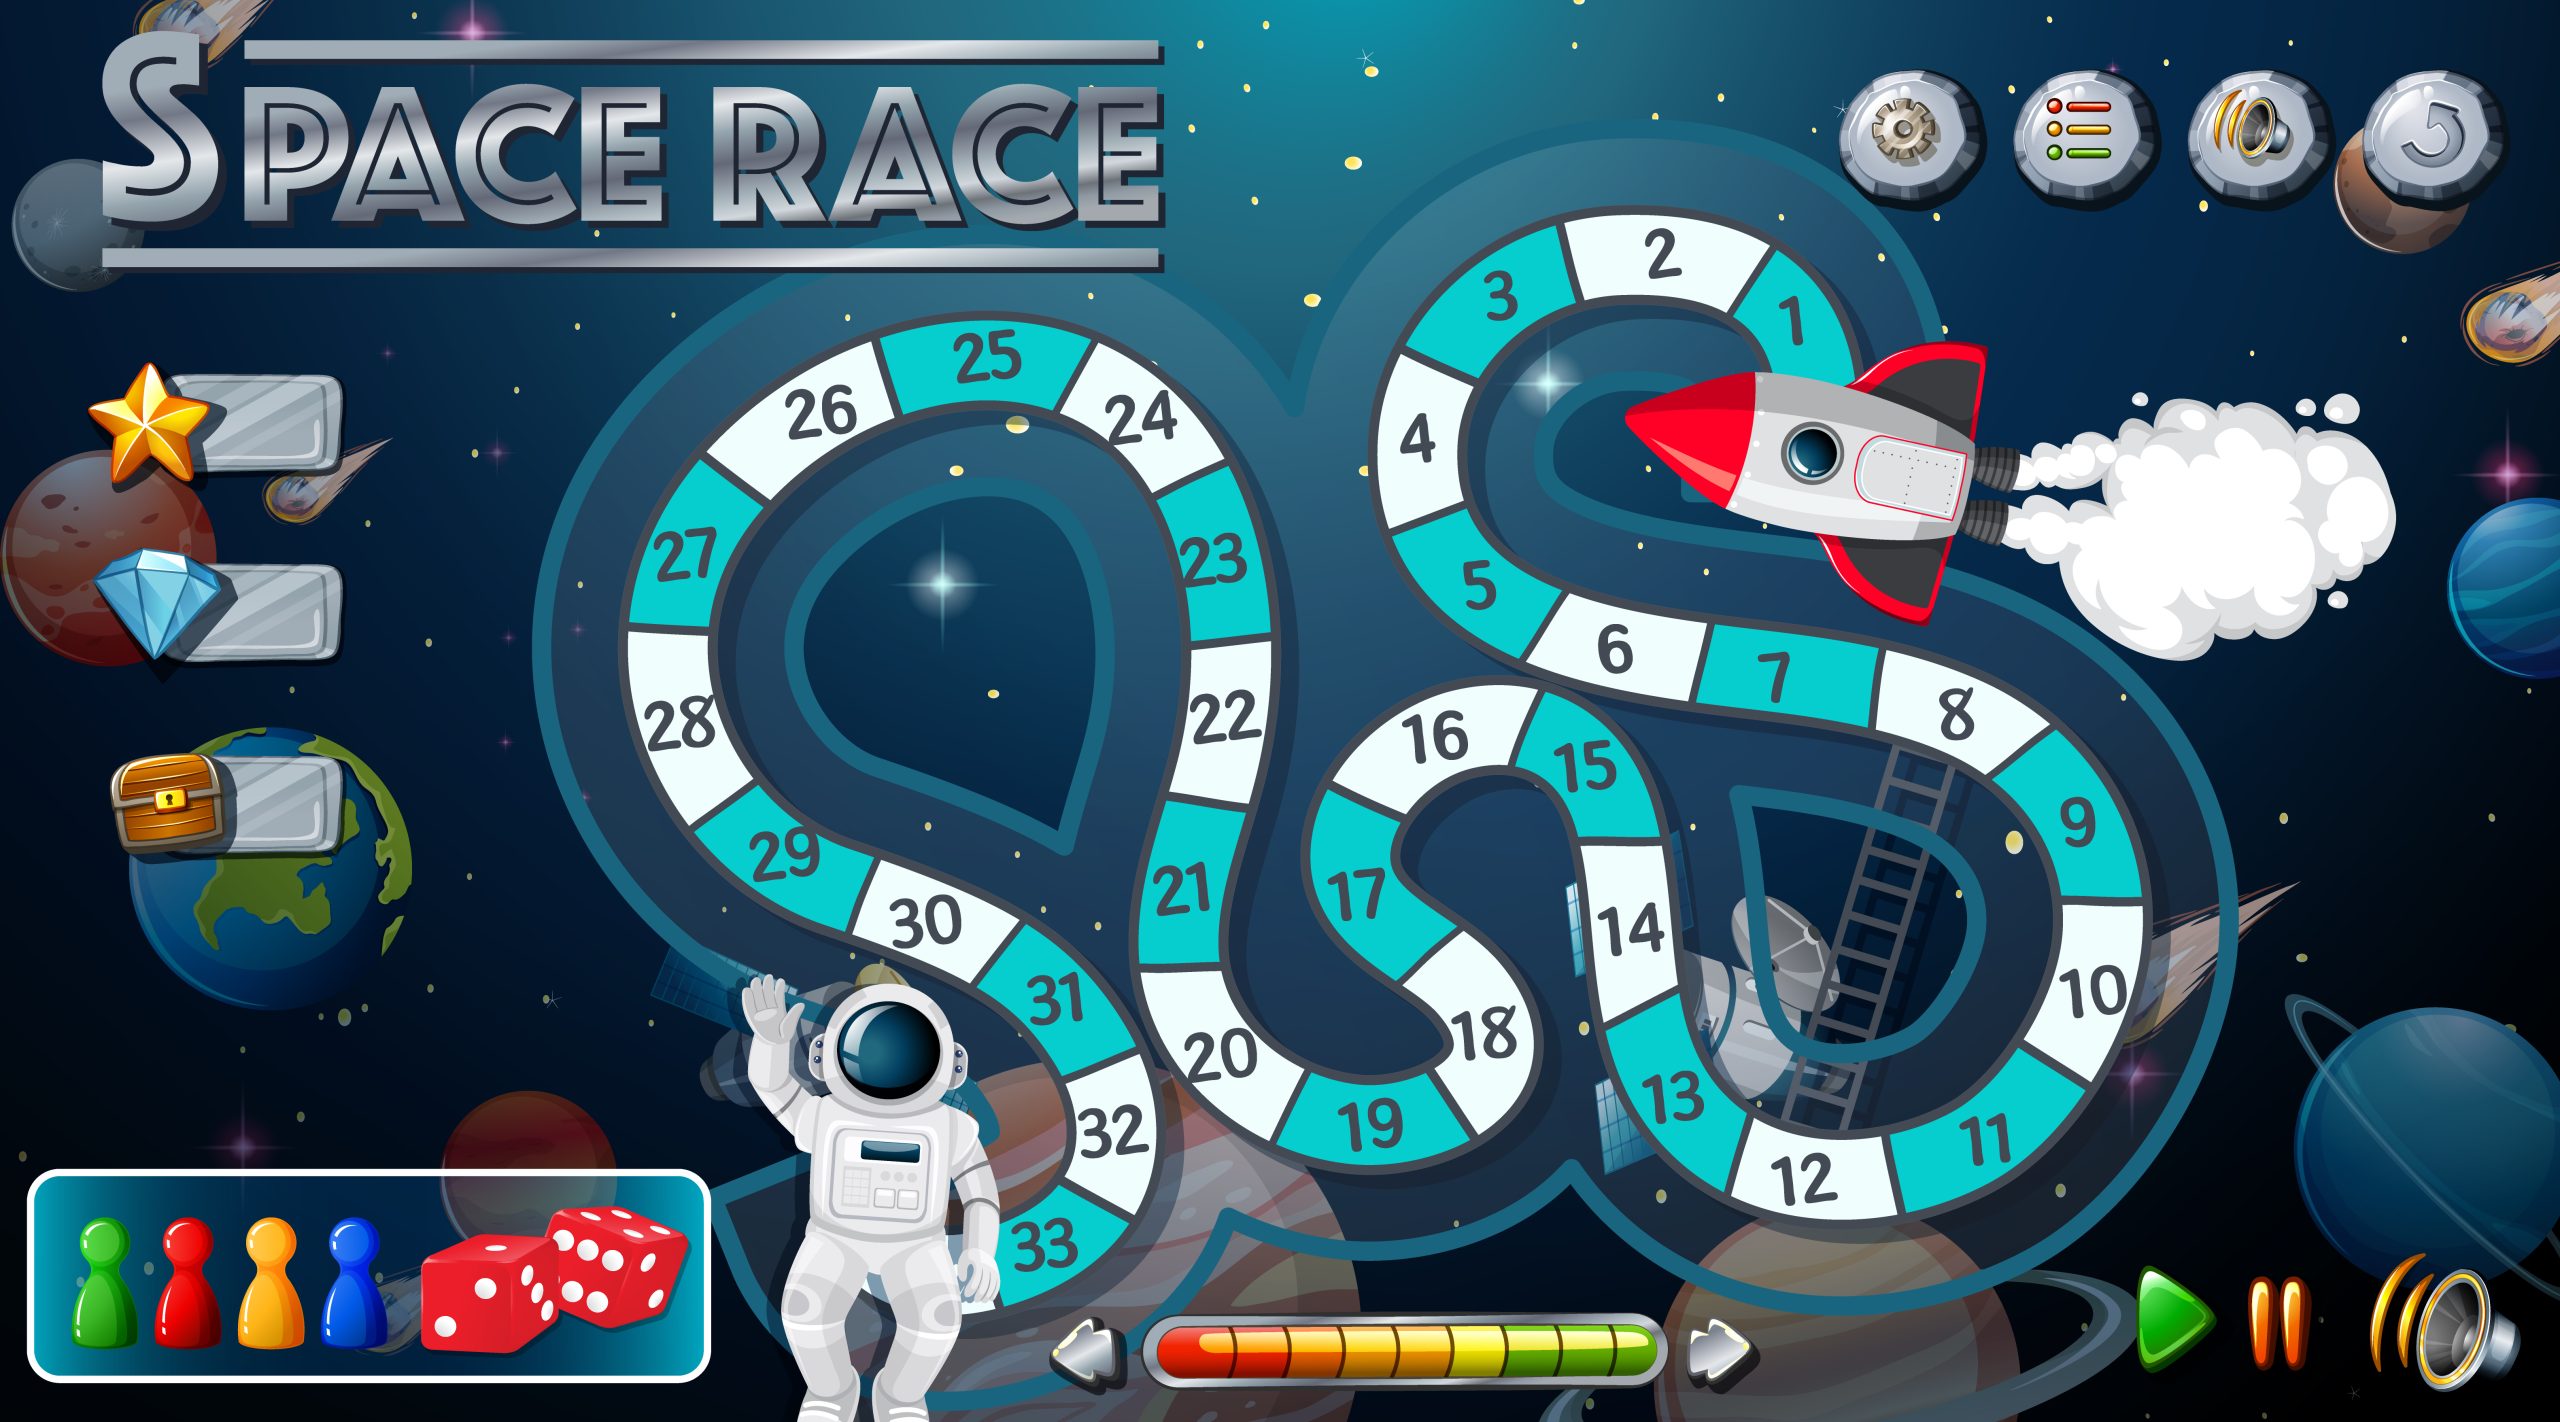 Snake and ladders game template with space theme illustration